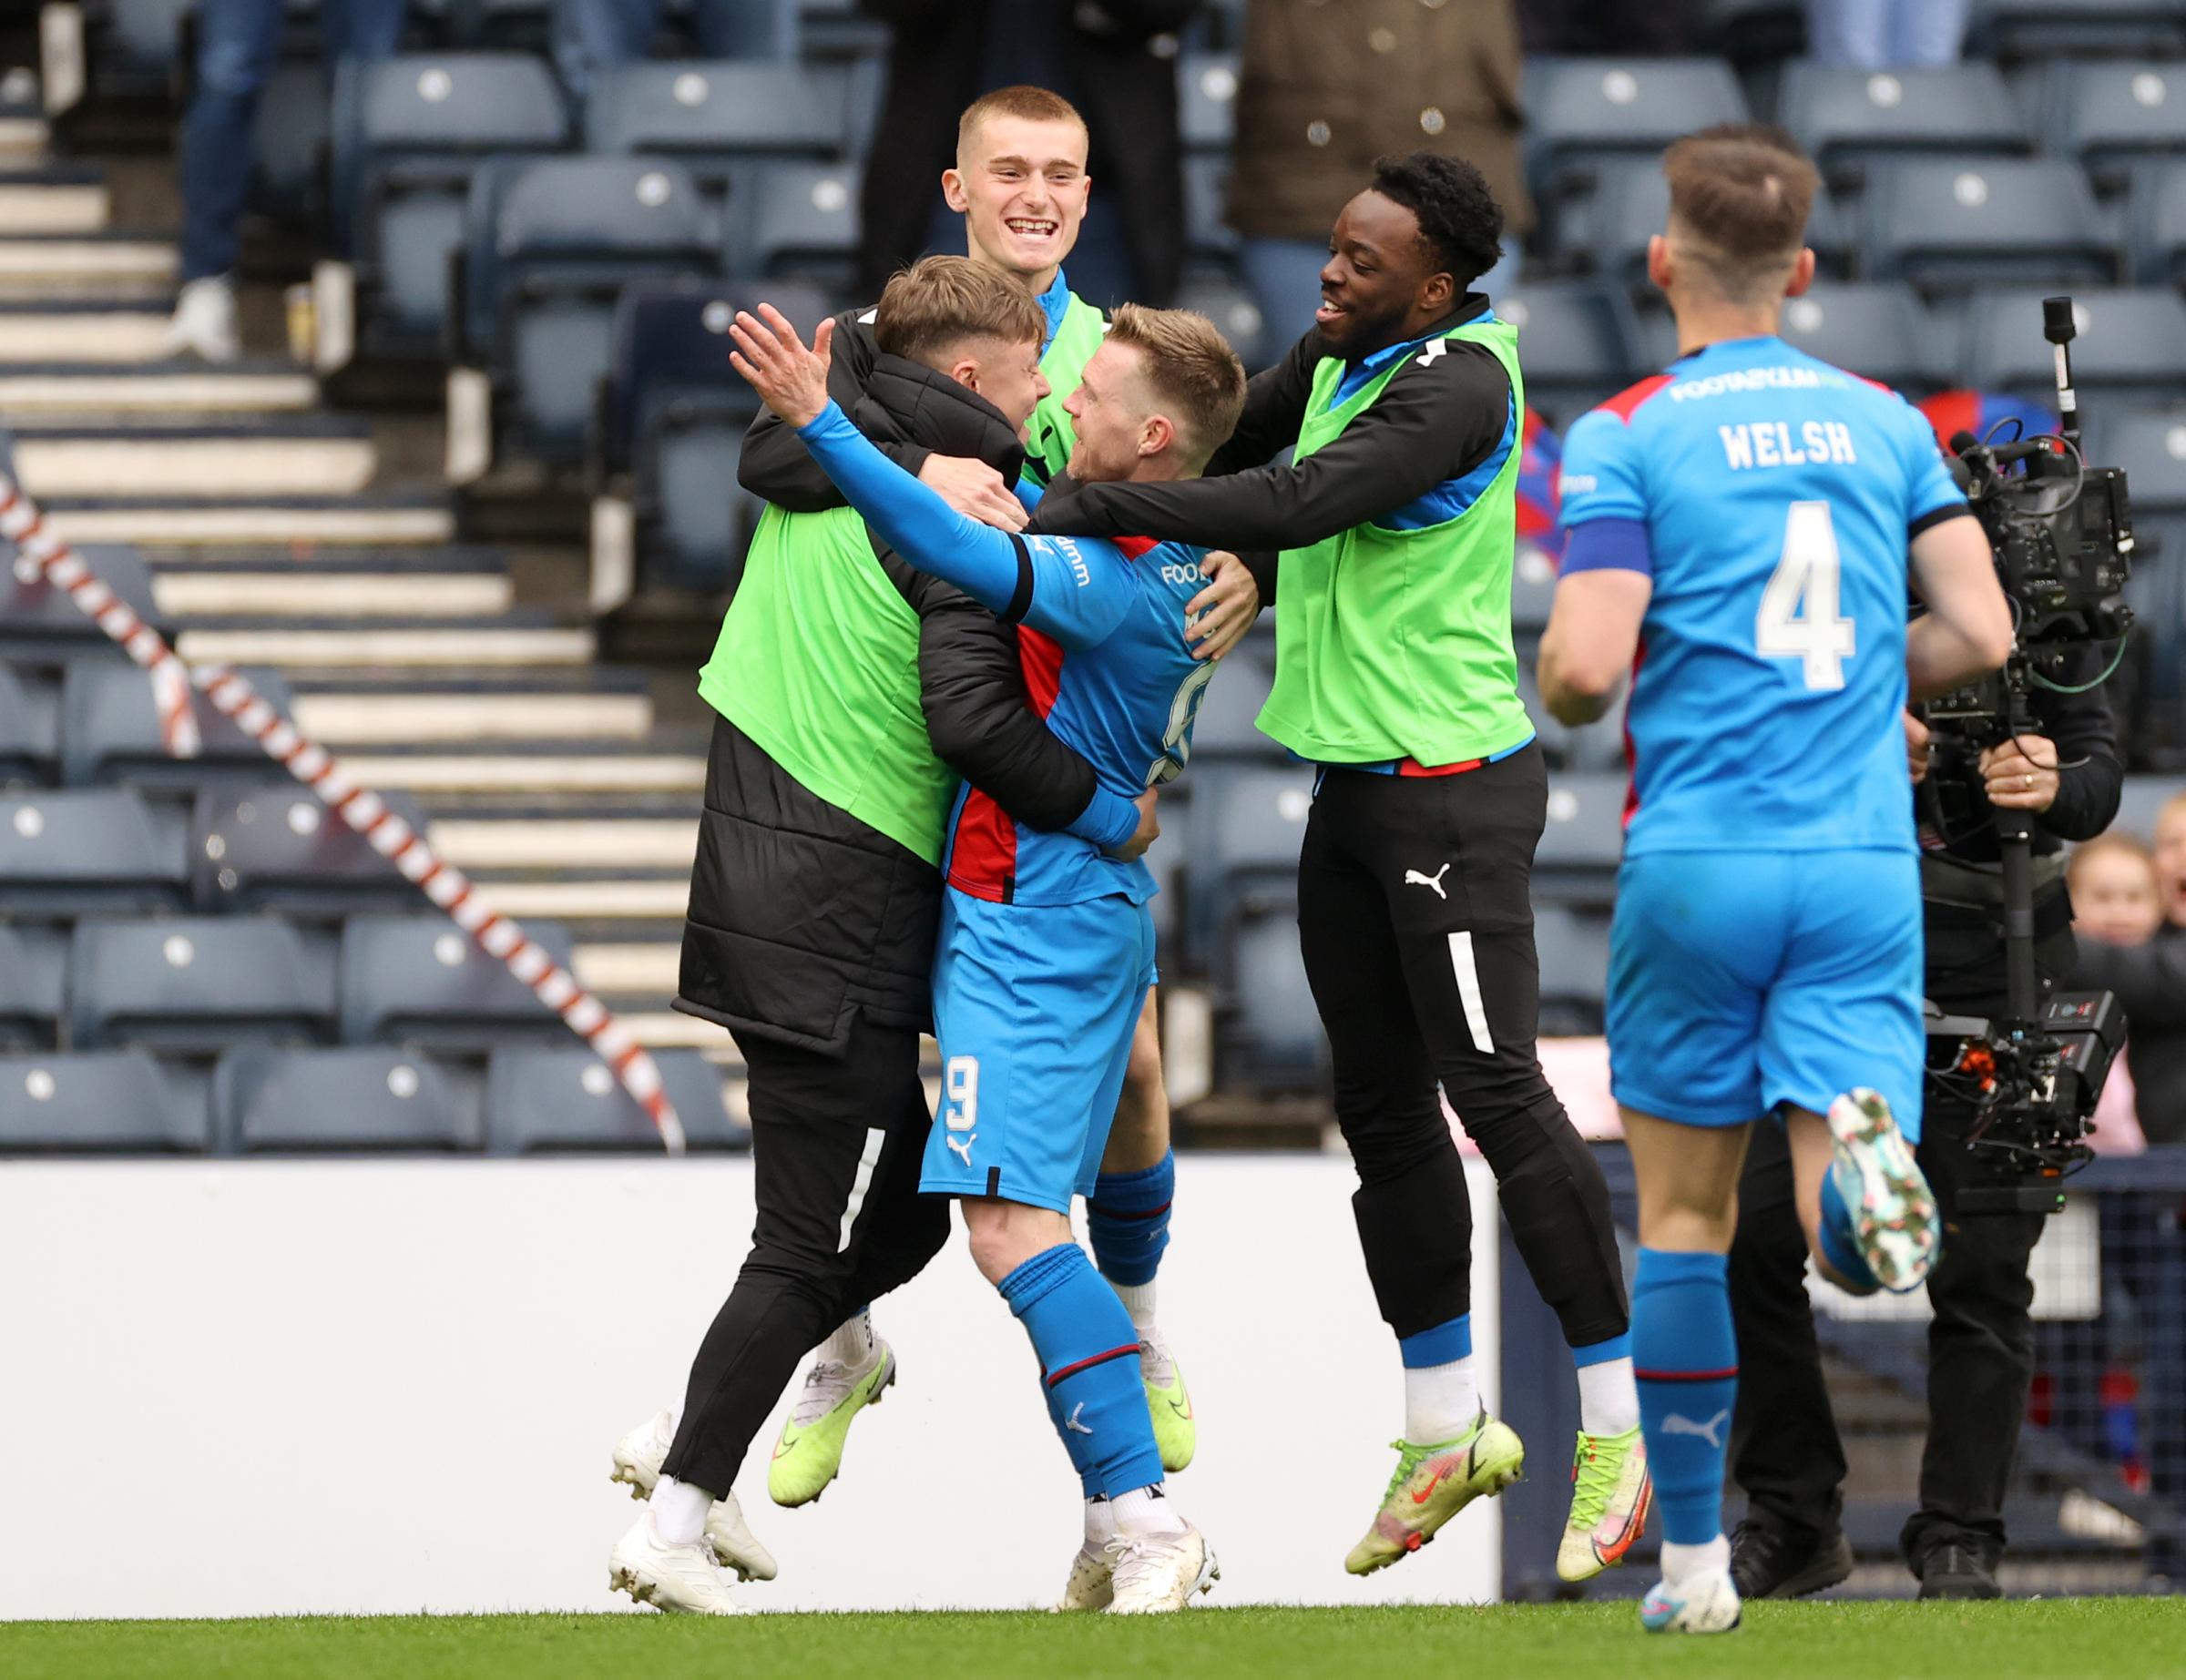 Falkirk 0 Inverness 3: Clinical Caley storm into Scottish Cup Final